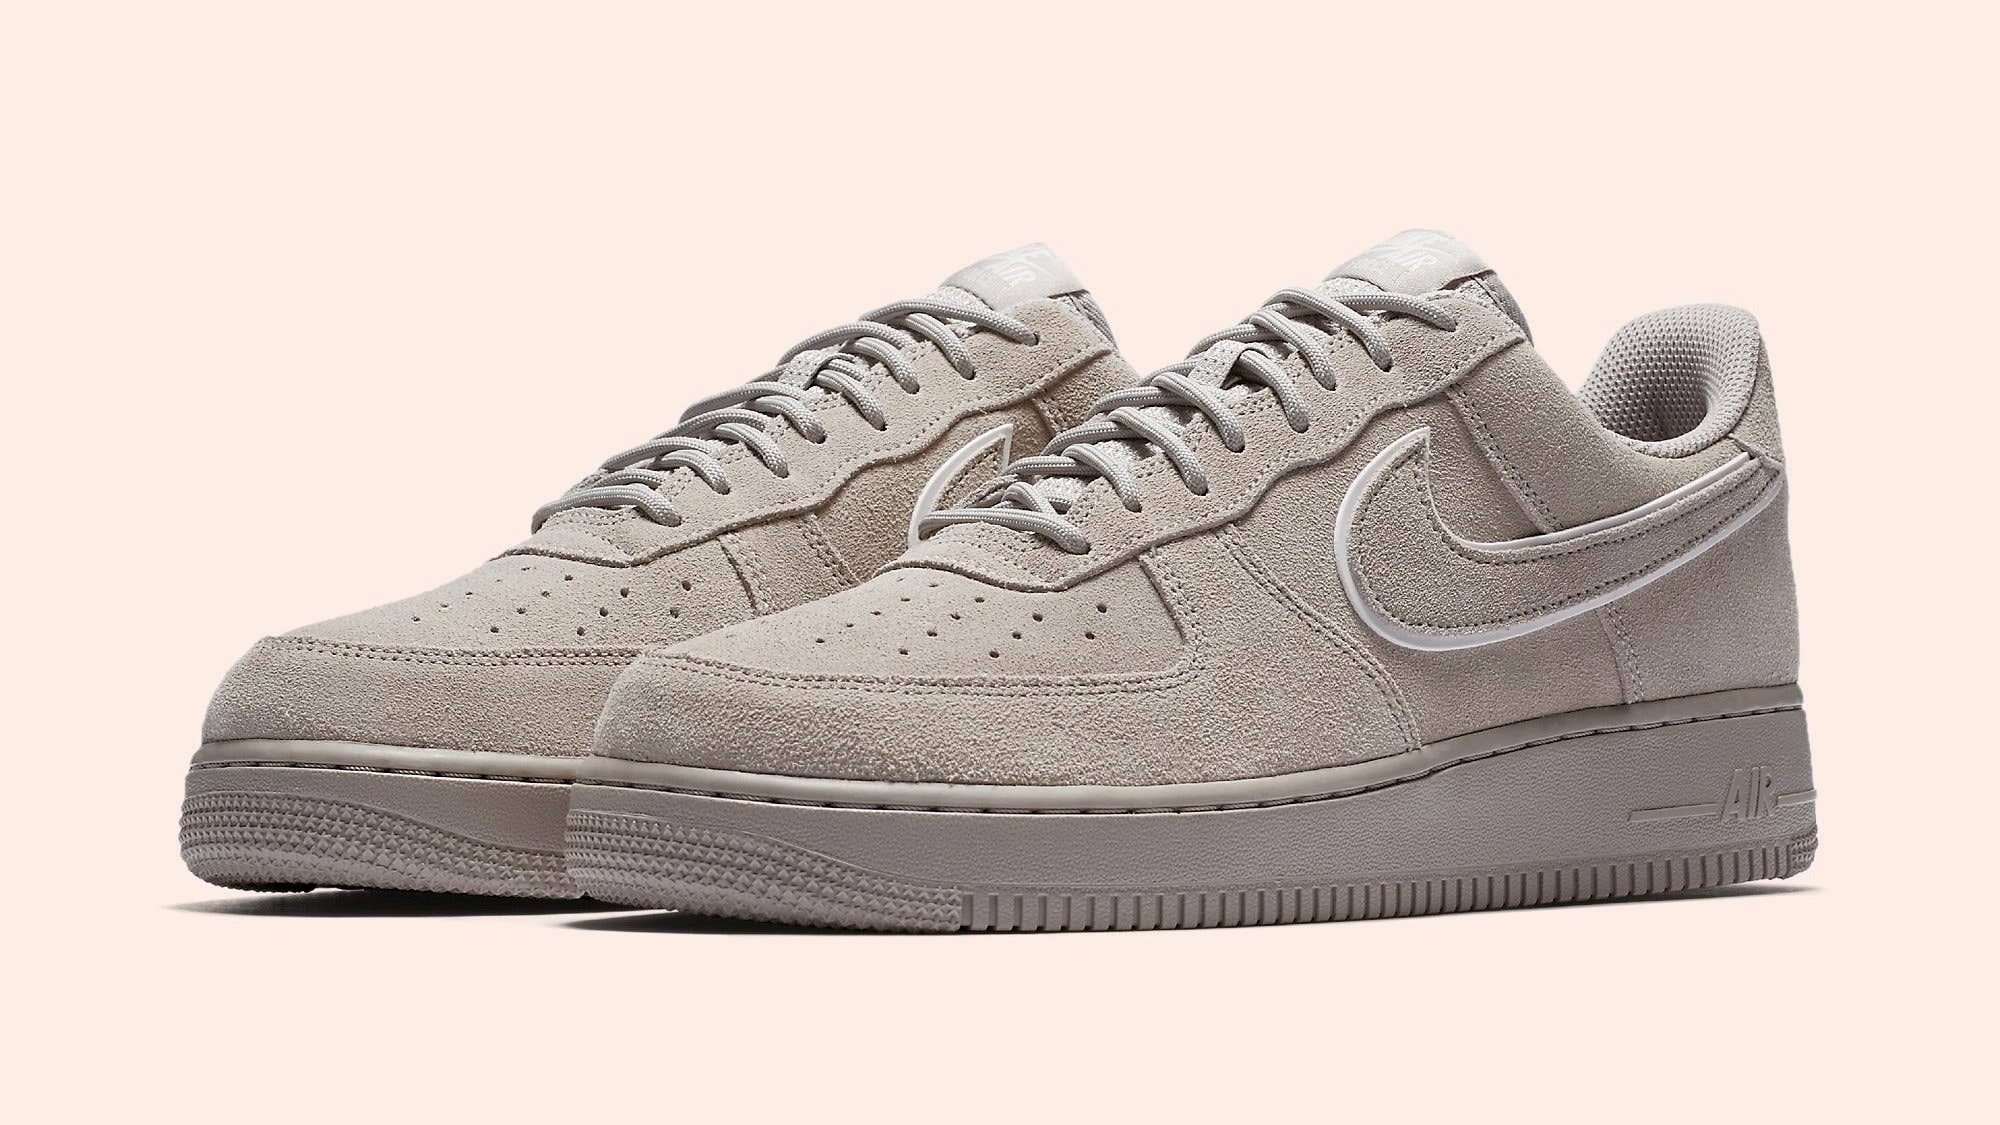 stout restaurant lever Nike Covered These Air Force 1s in Suede | Complex